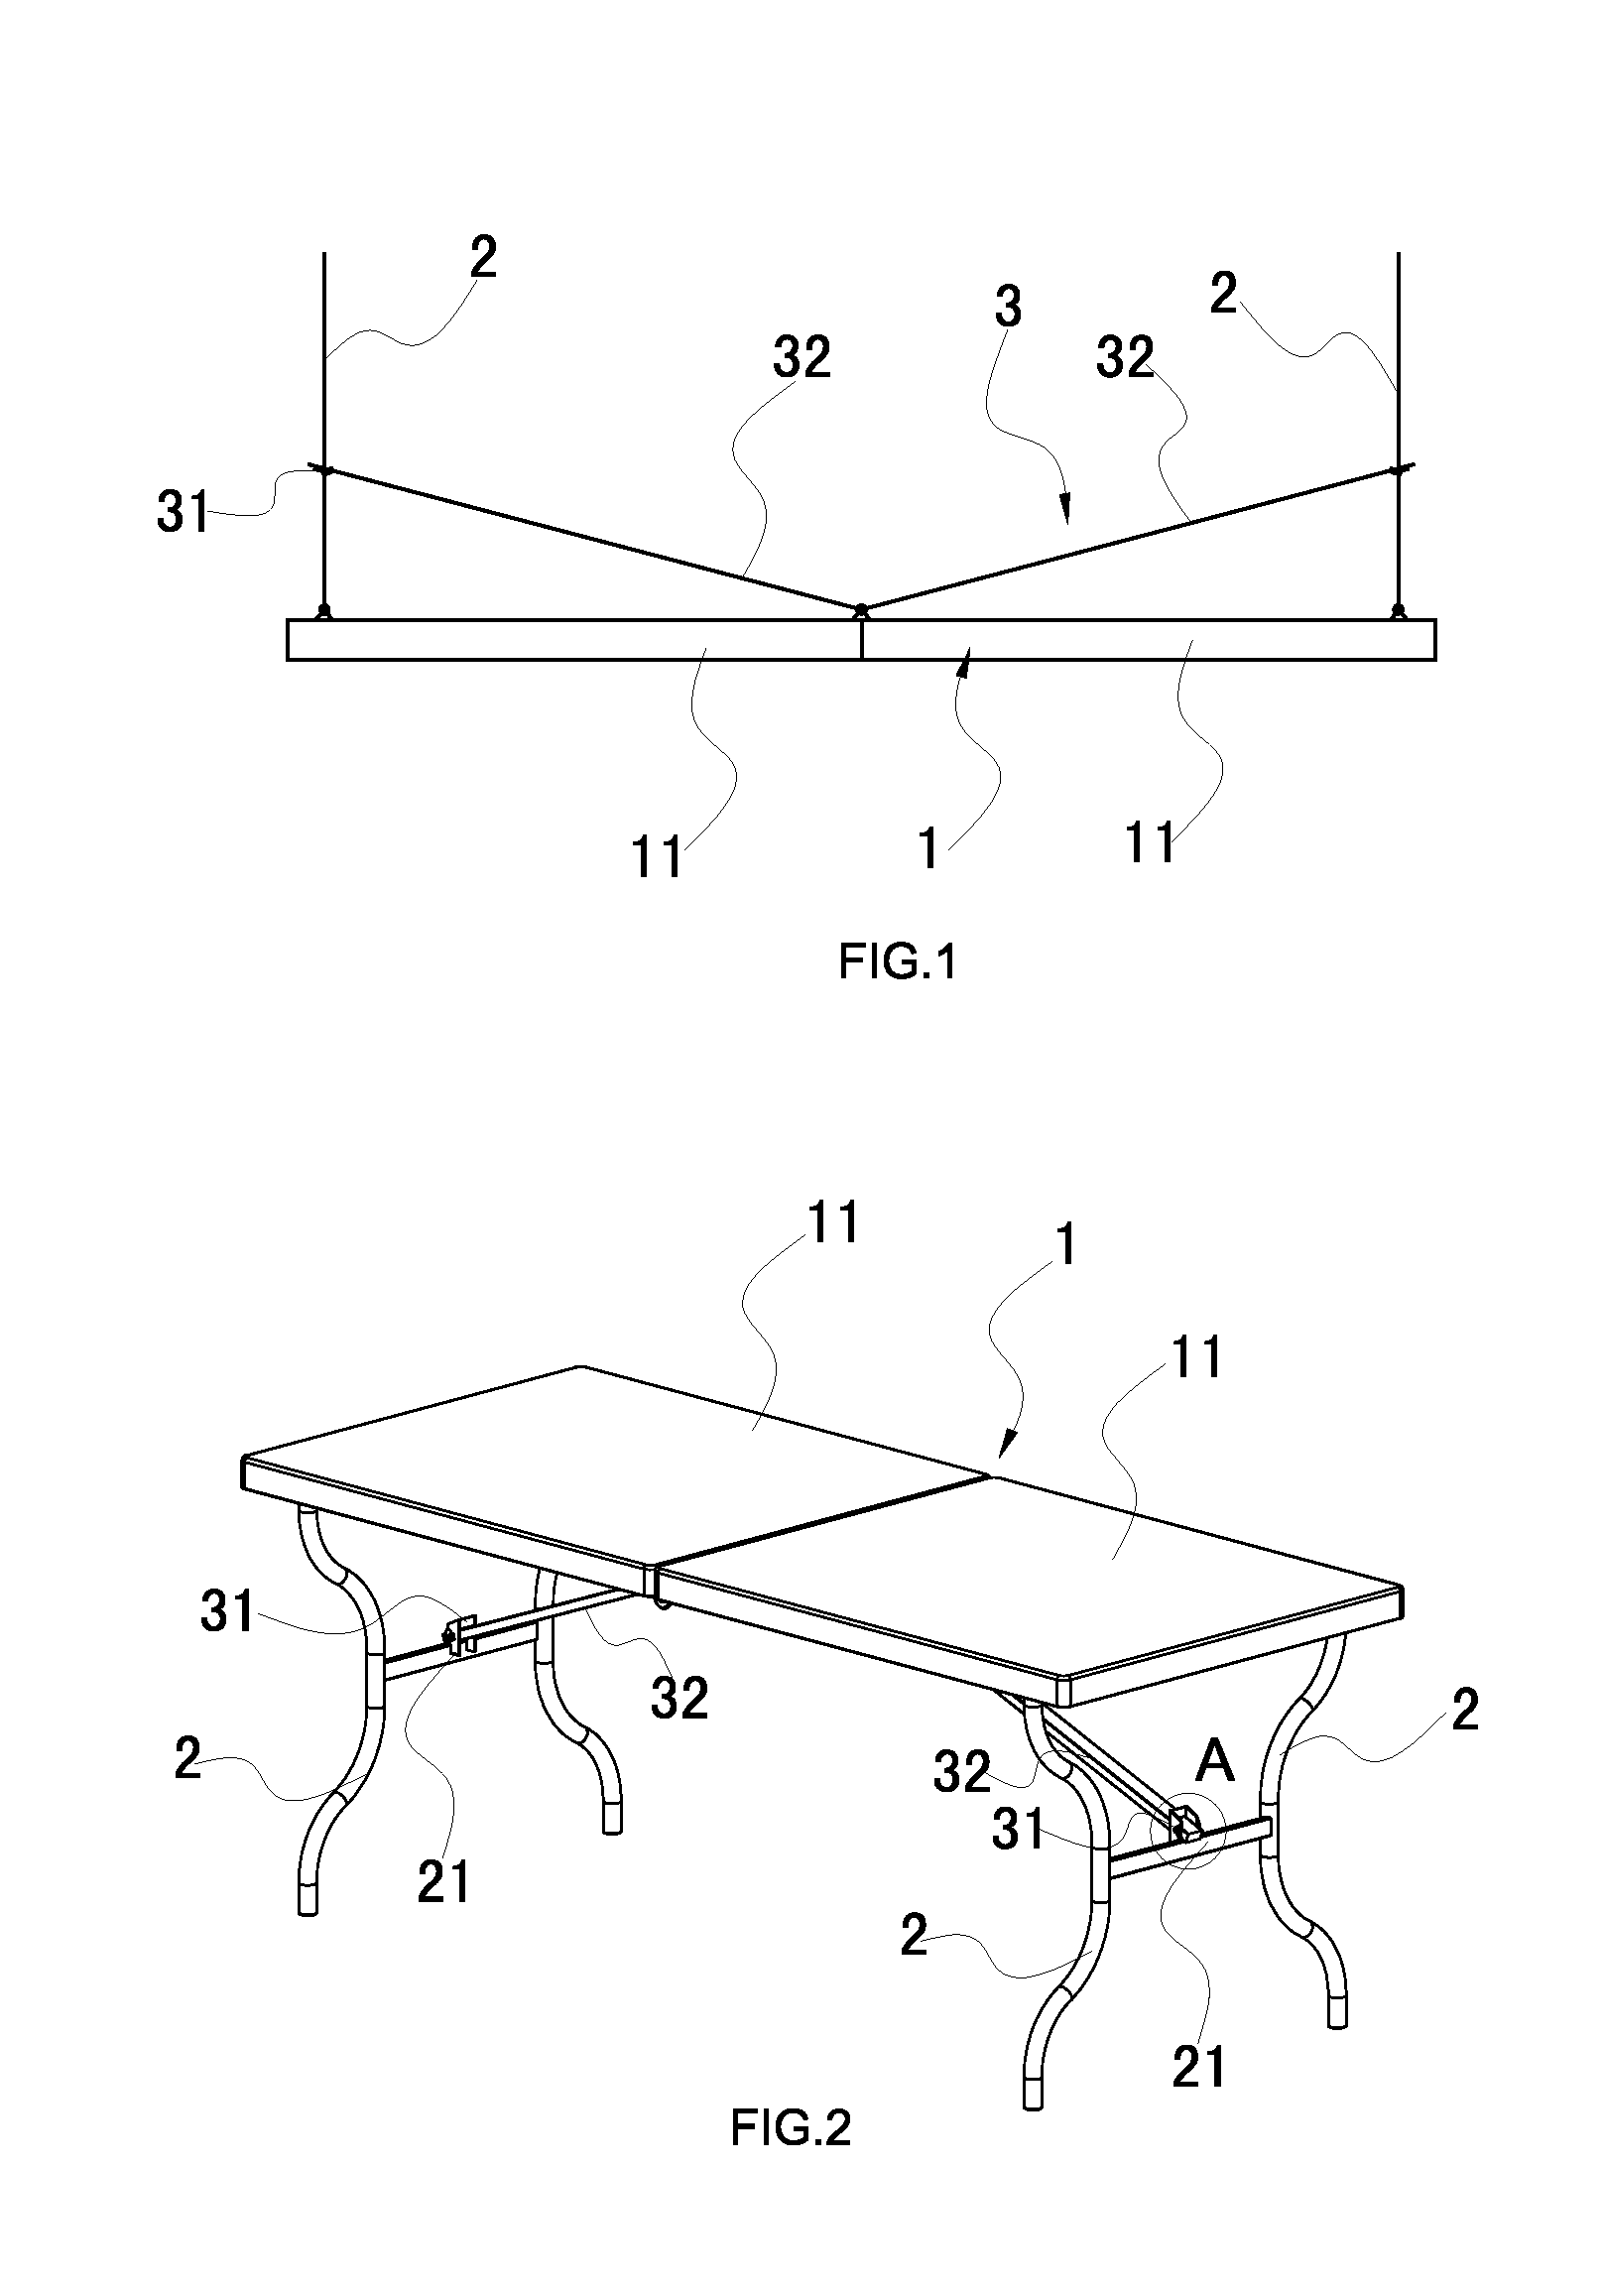 Folding assembly and foldaway table